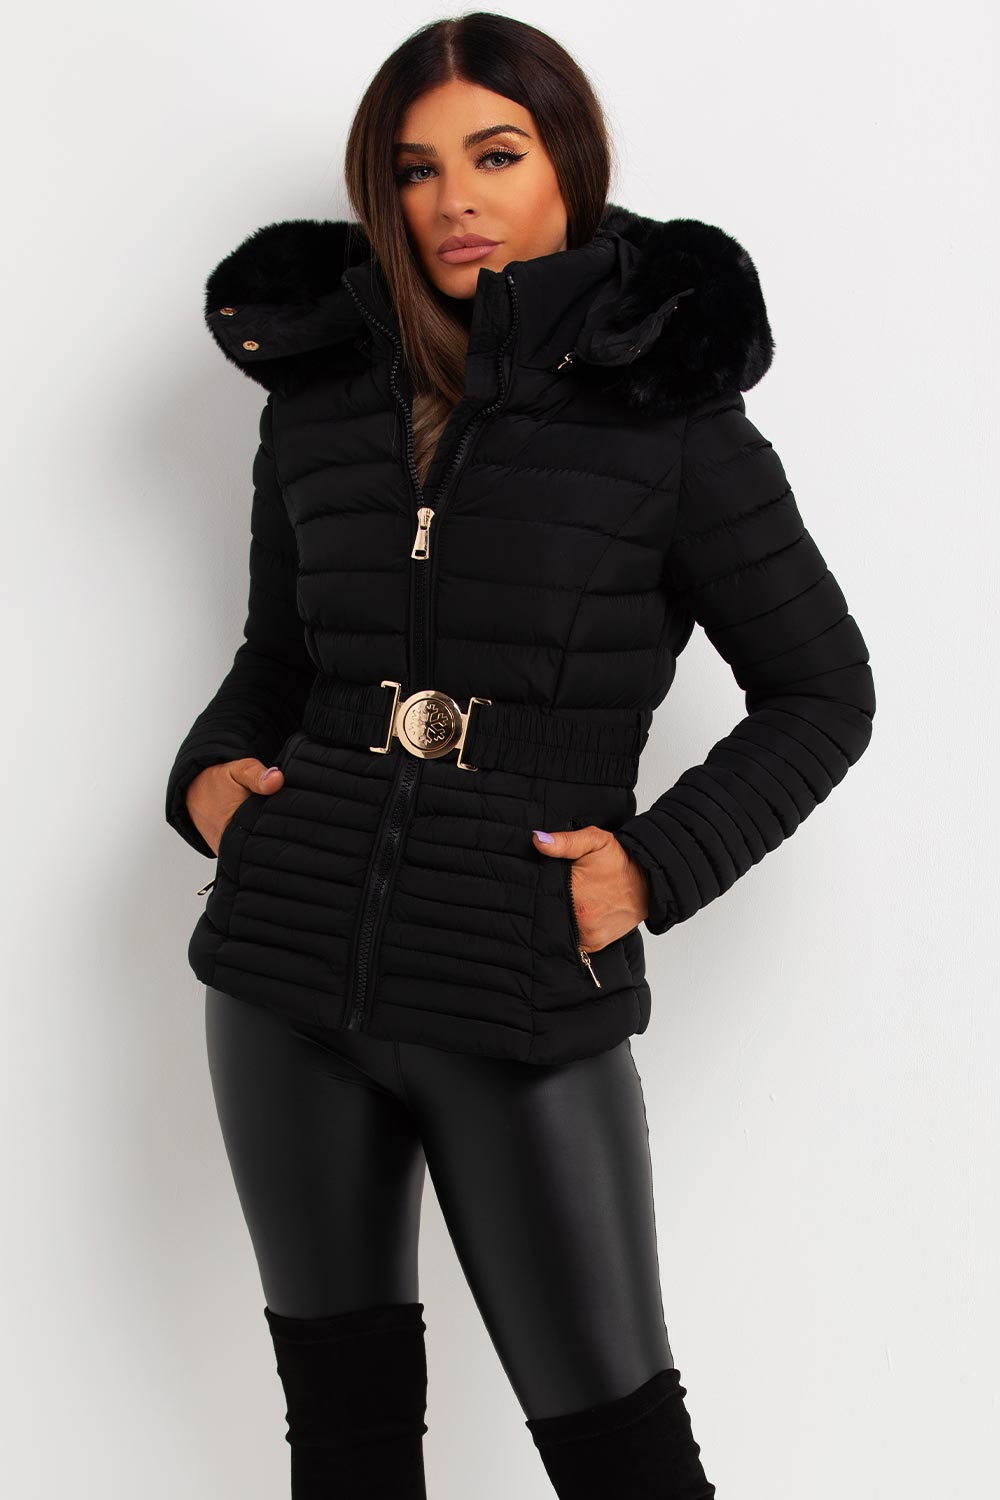 Women's Black Puffer Jacket With Faux Fur Hood And Gold Belt Outerwear ...